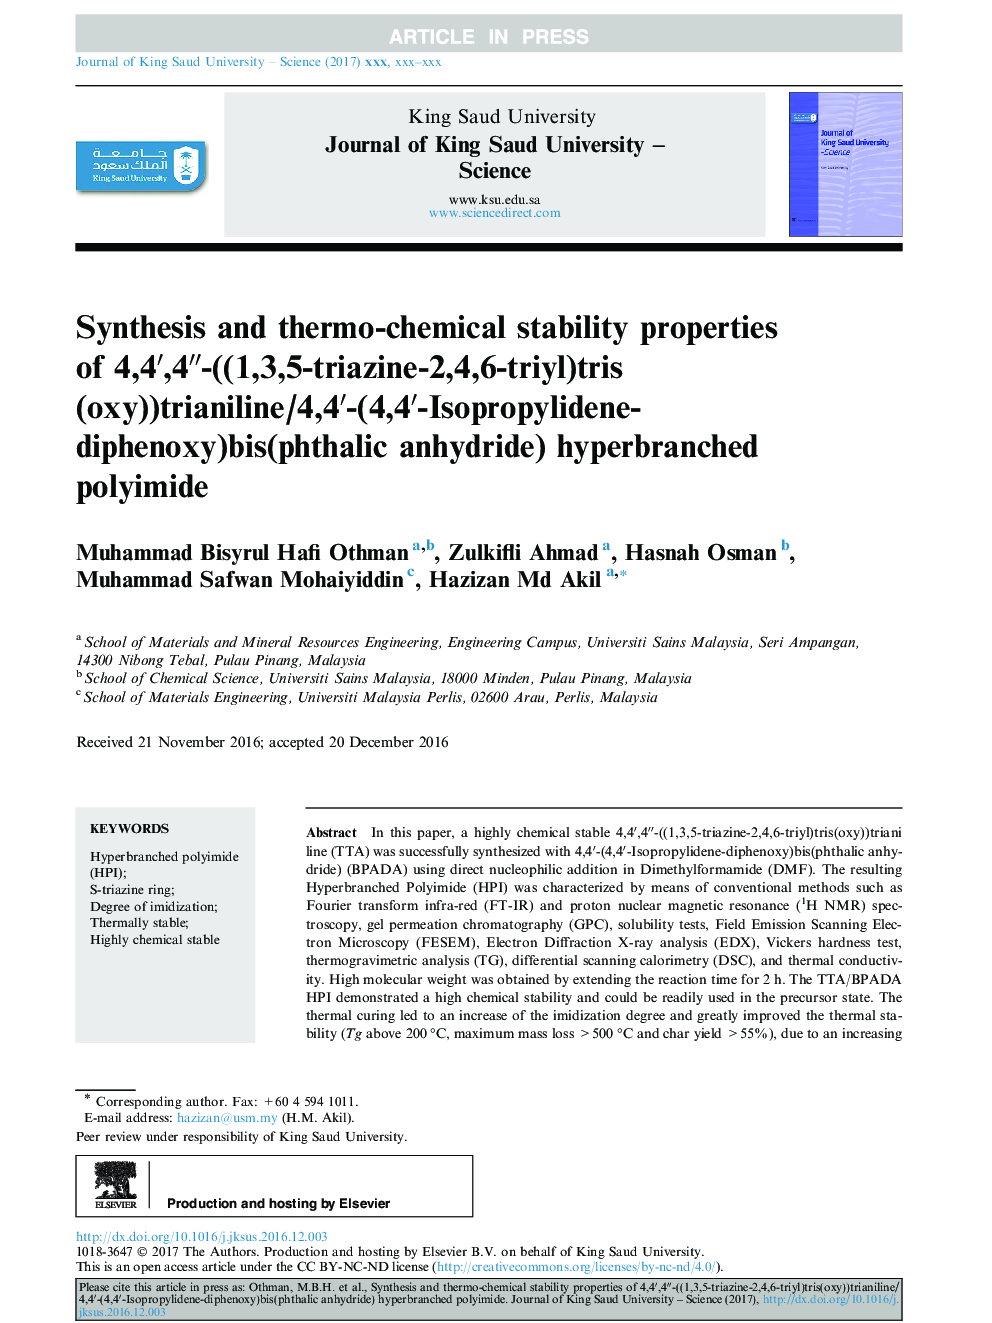 Synthesis and thermo-chemical stability properties of 4,4â²,4â³-((1,3,5-triazine-2,4,6-triyl)tris(oxy))trianiline/4,4â²-(4,4â²-Isopropylidene-diphenoxy)bis(phthalic anhydride) hyperbranched polyimide